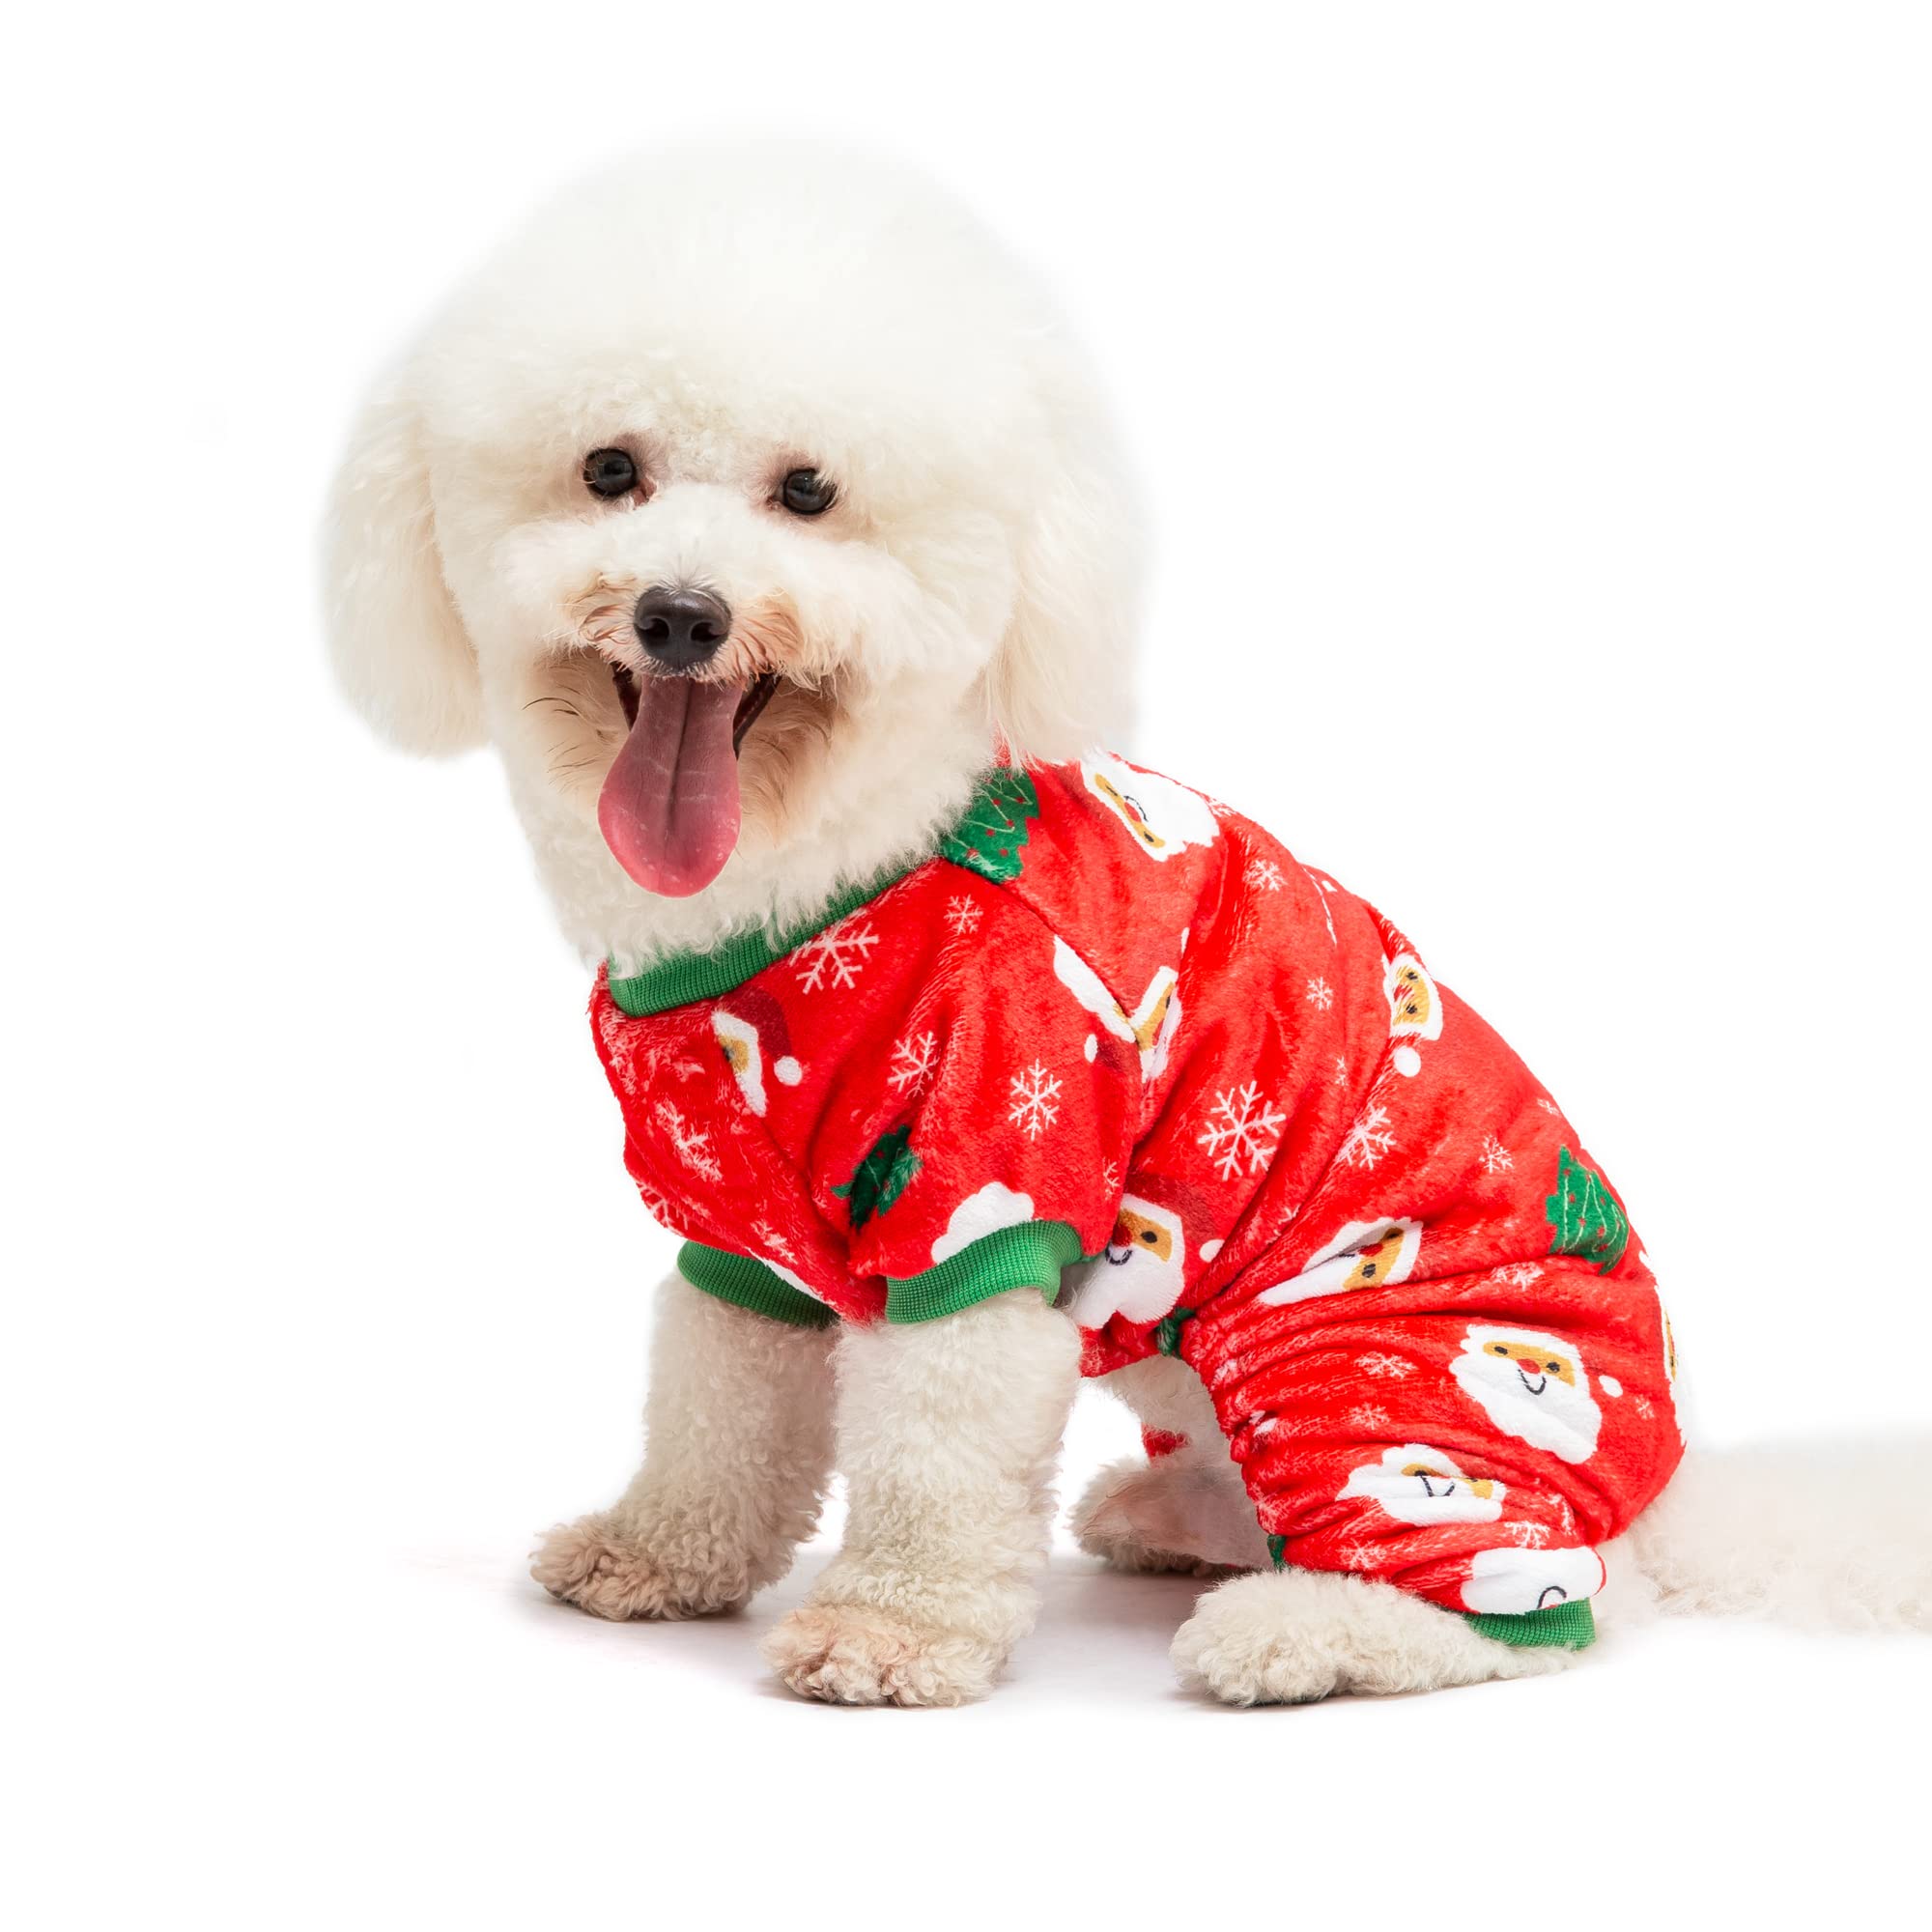 Christmas Pet Pajamas For Dogs And Small Pets, Snowman And Flake Designs